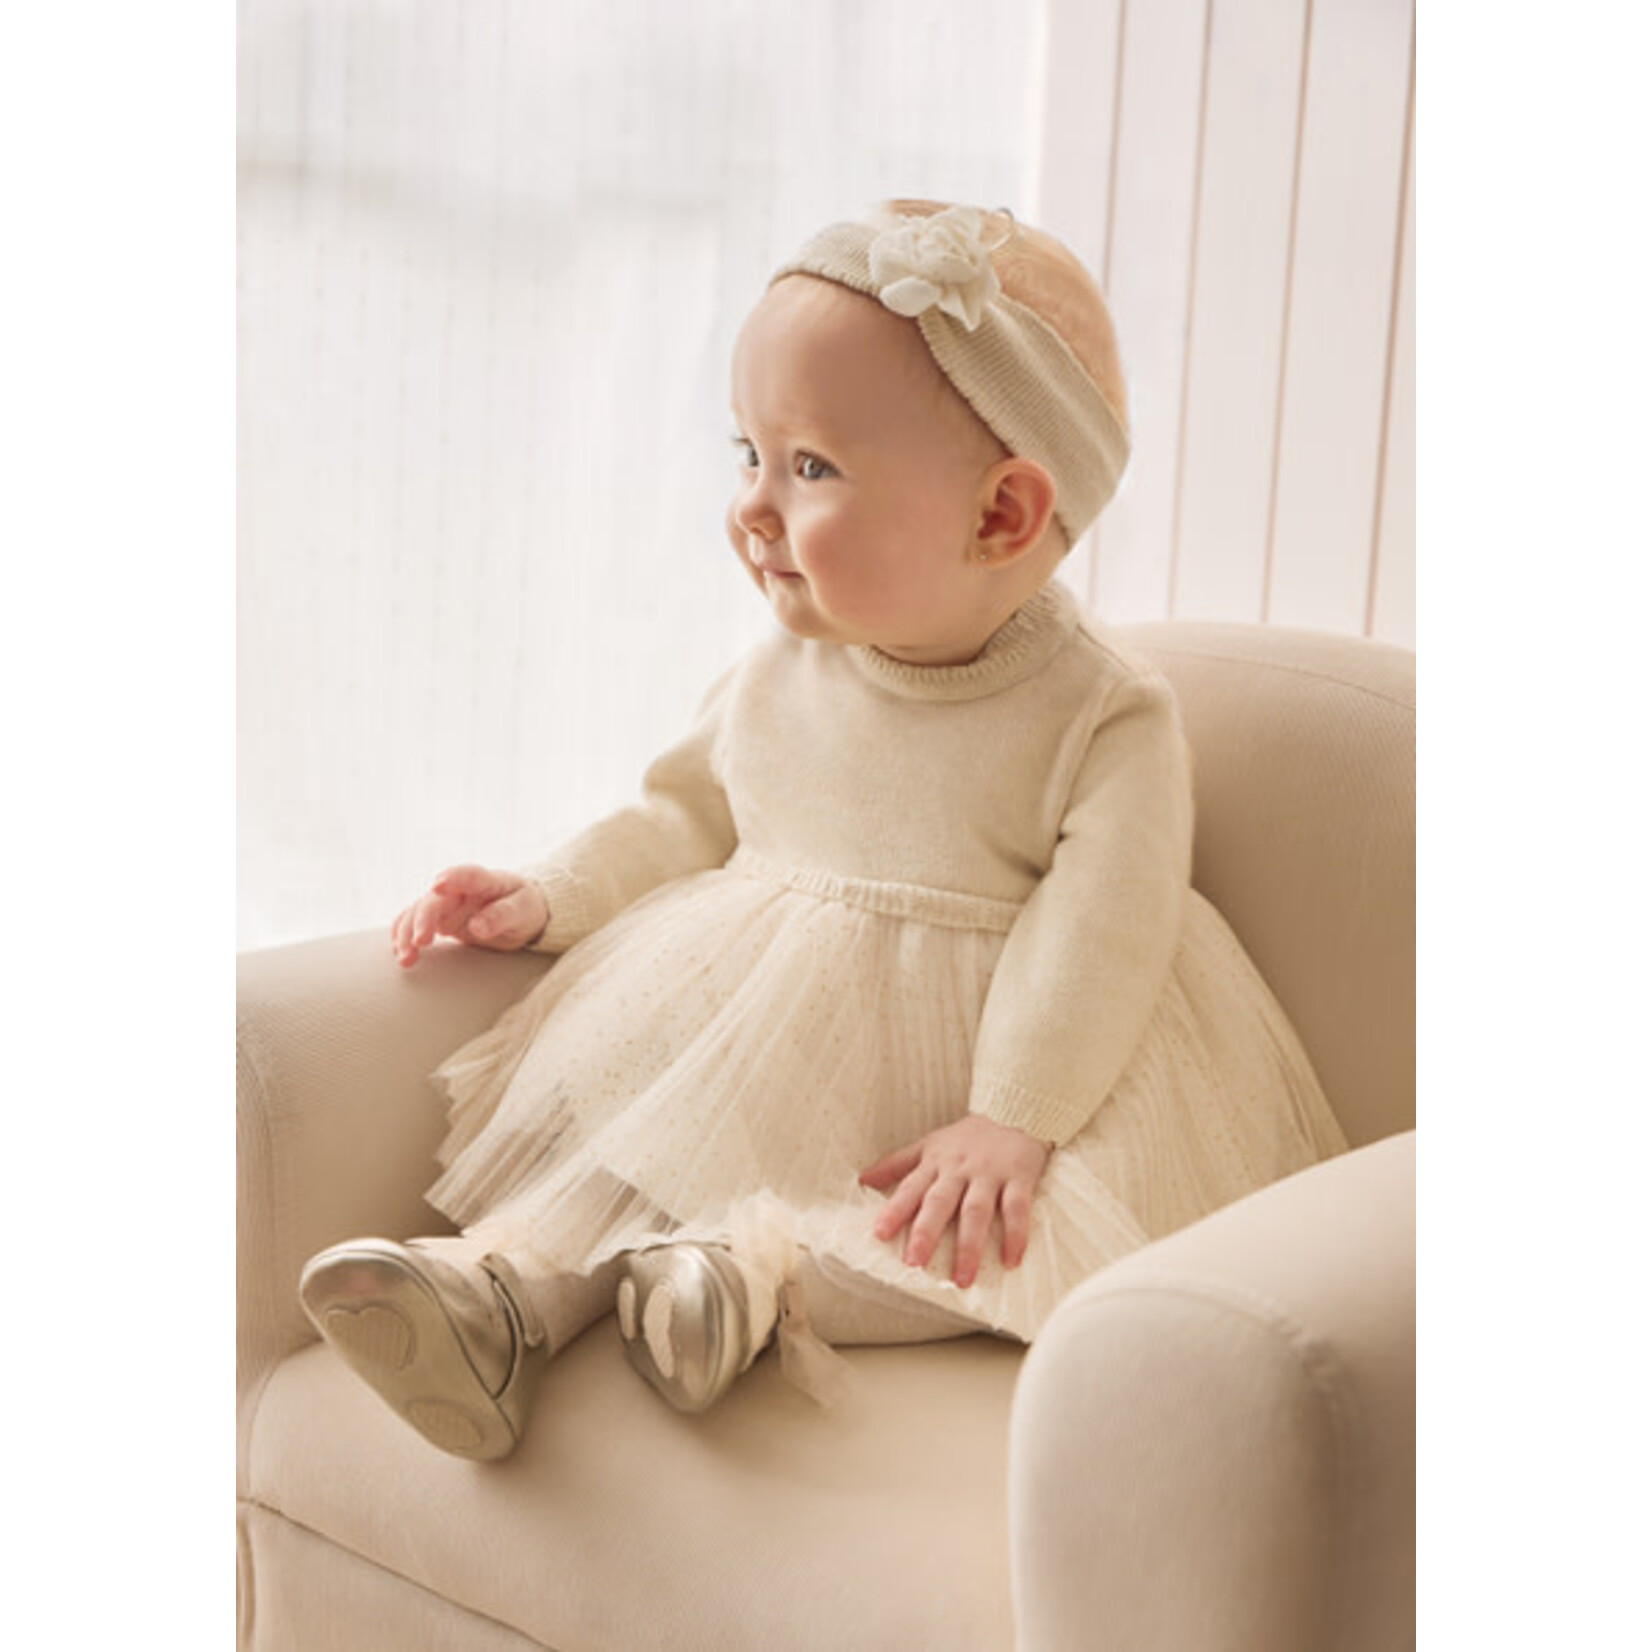 MAYORAL NEWBORN [BABY] KNIT TULLE DRESS